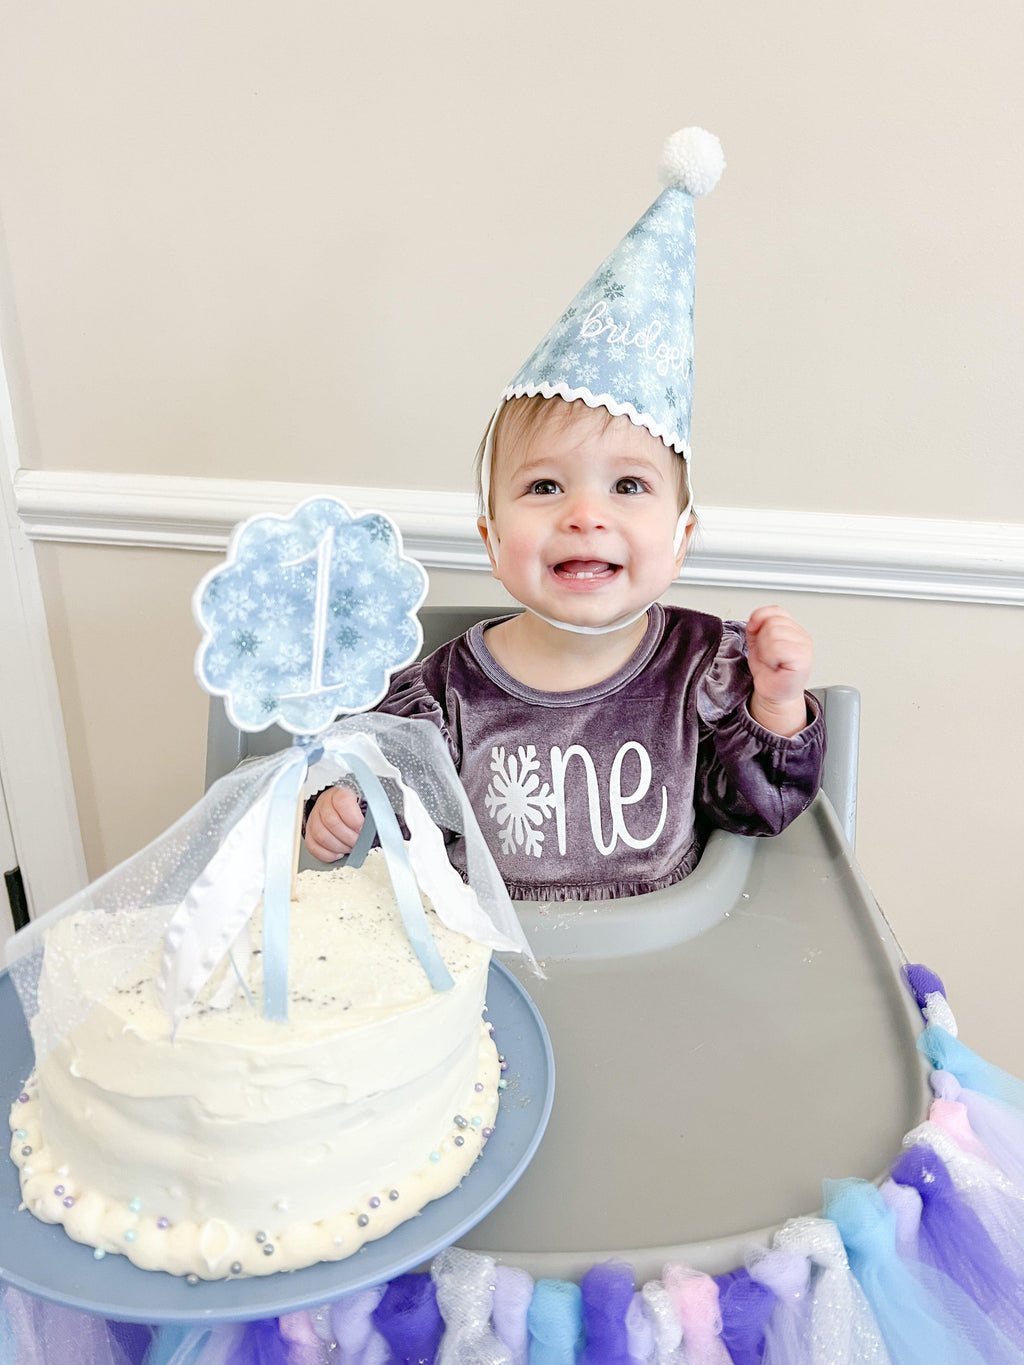 Party Hat - Custom | Nashville Bow Co. - Classic Hair Bows, Bow Ties, Basket Bows, Pacifier Clips, Wreath Sashes, Swaddle Bows. Classic Southern Charm.